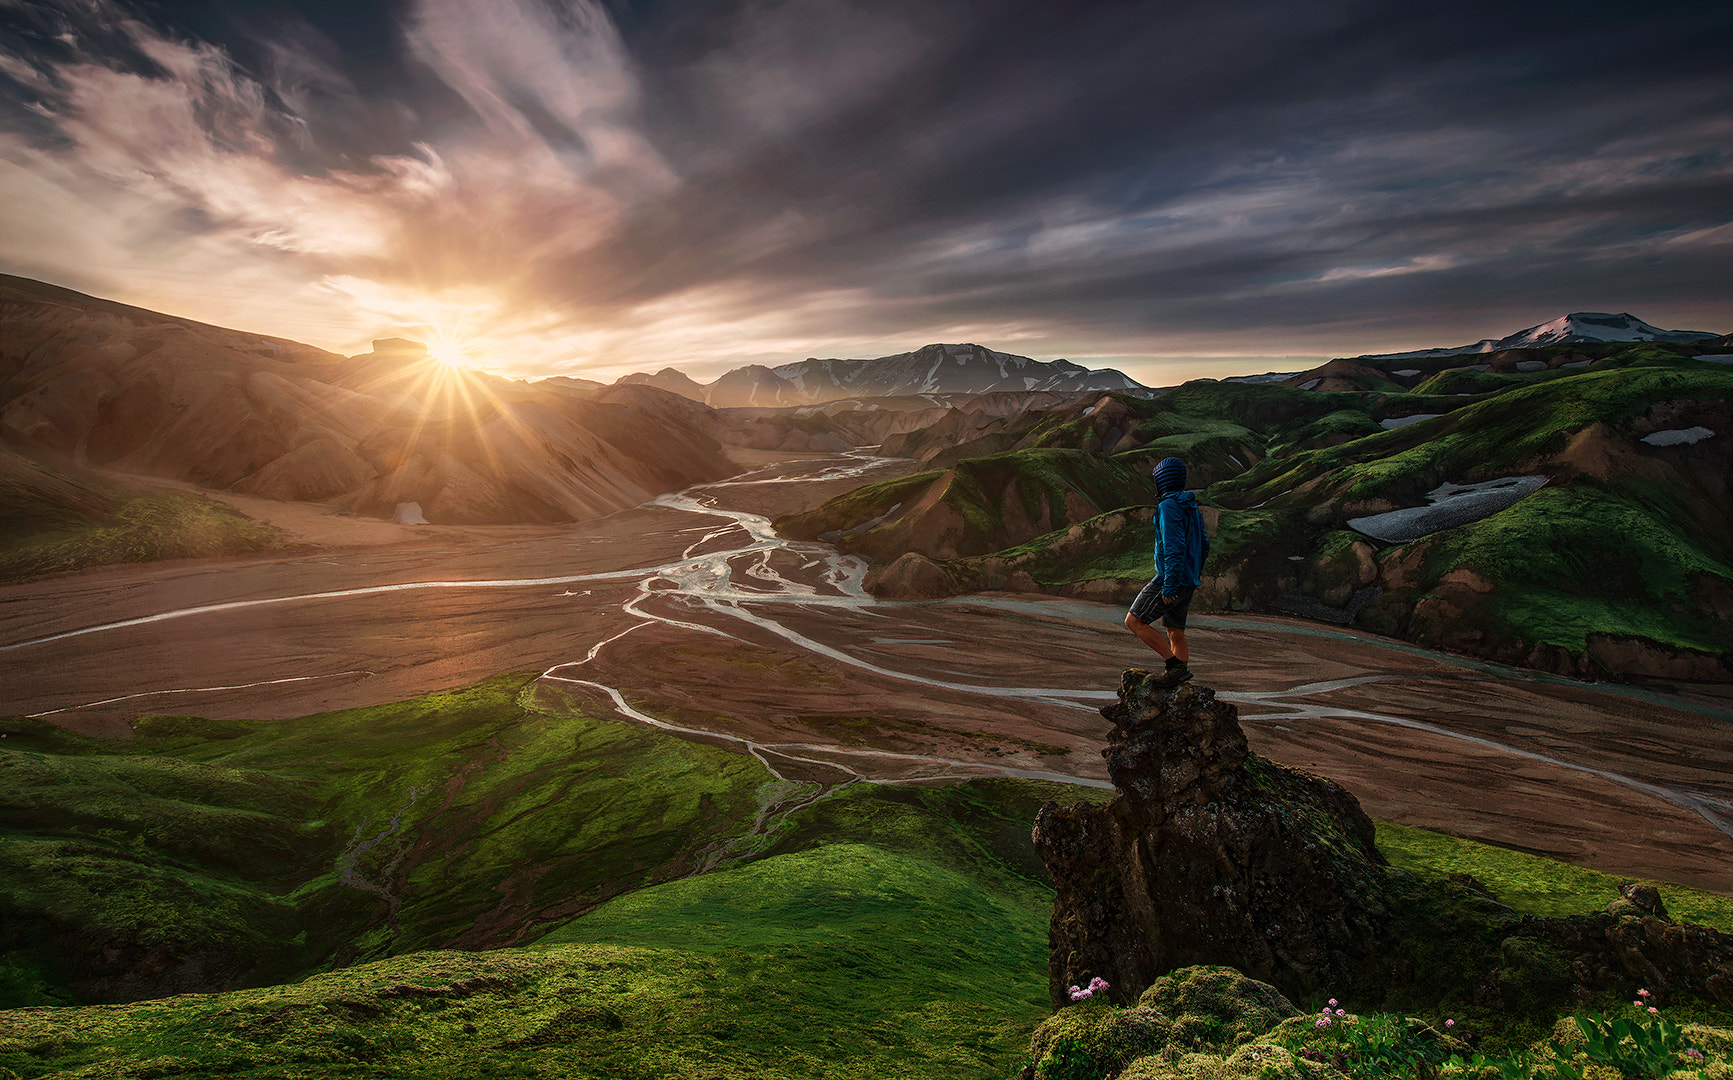 45 Scenic Self-Portraits That Will Take You Places - 500px